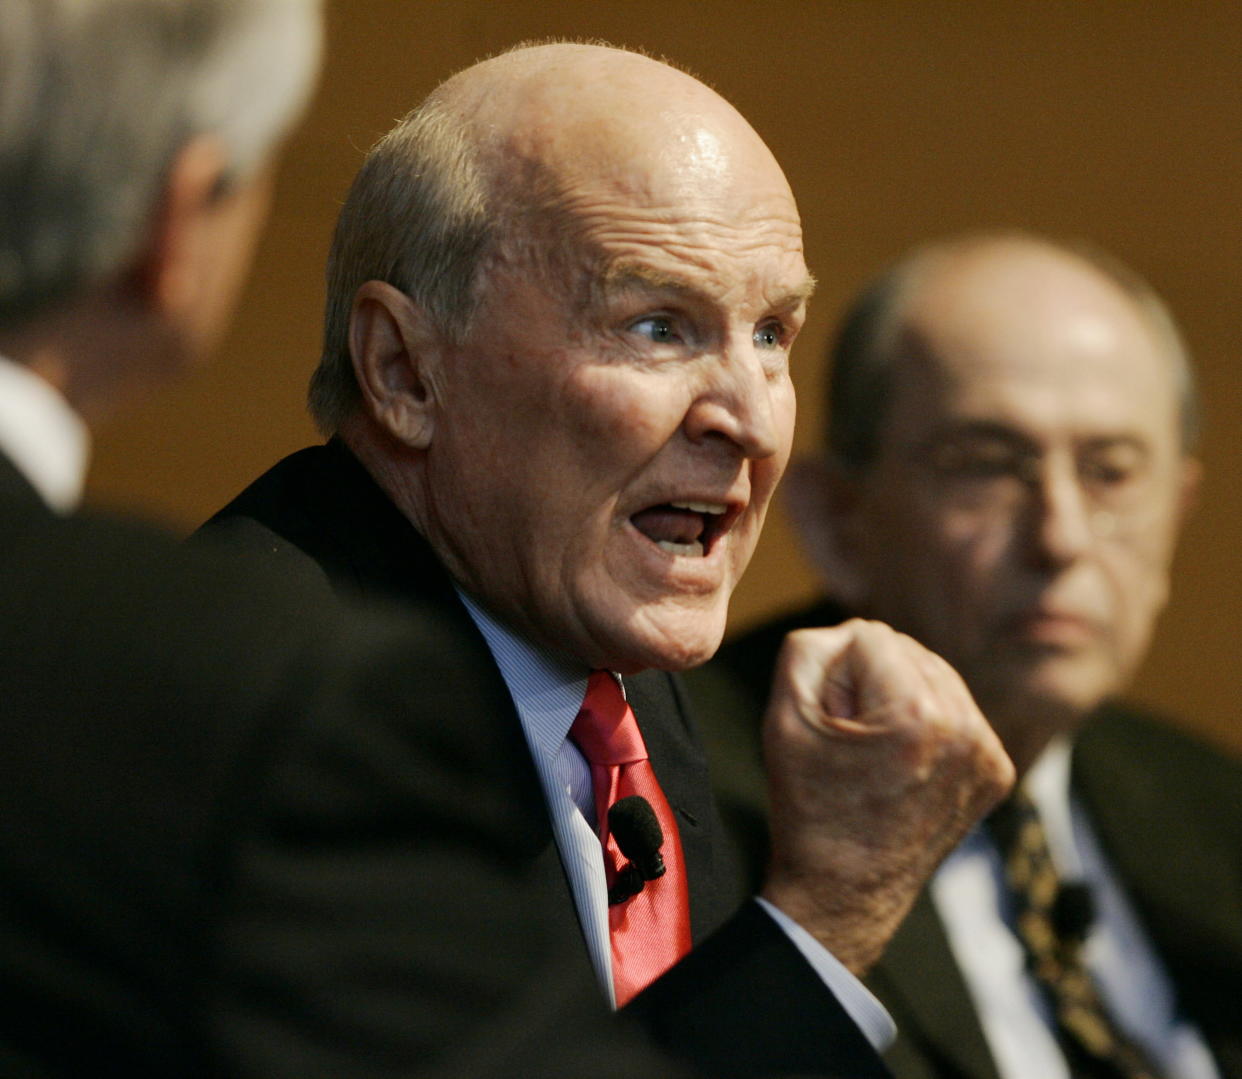 Retired CEO and Chairman of General Electric Jack Welch speaks to students at the Sloan School of Management at the Massachusetts Institute of Technology in Cambridge, Massachusetts April 12, 2005. Welch took questions from students and spoke about his new book 